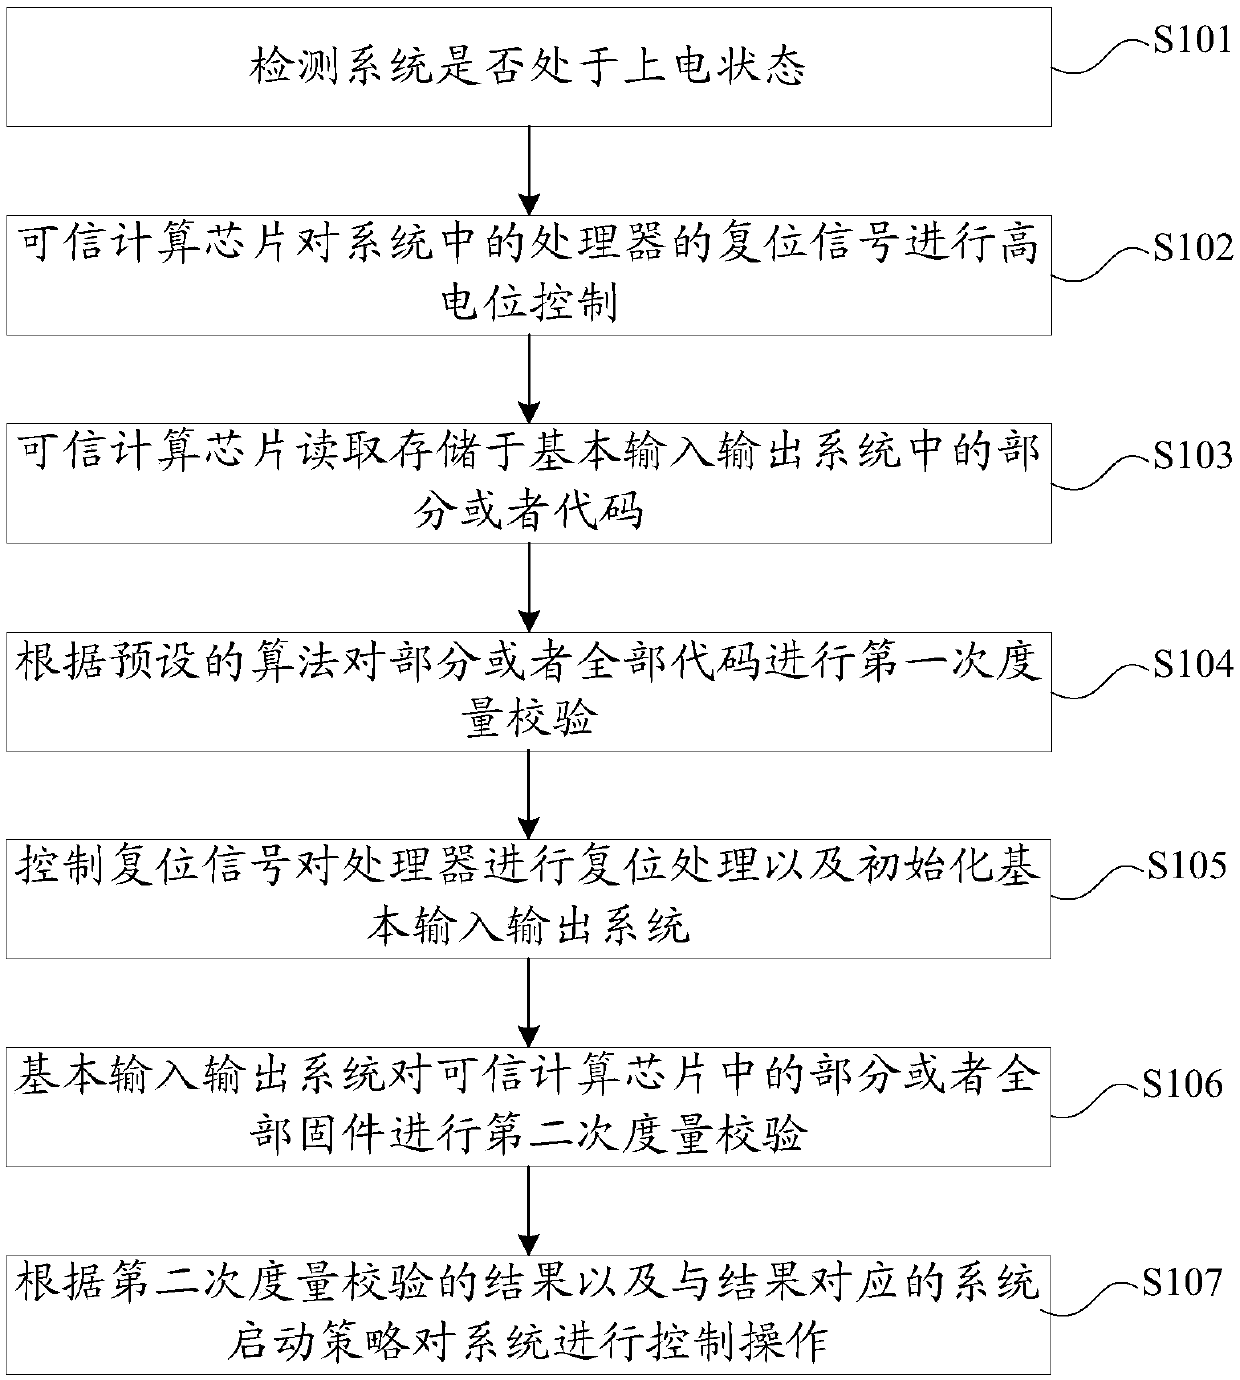 Trusted computing measurement method and system and computer readable storage medium